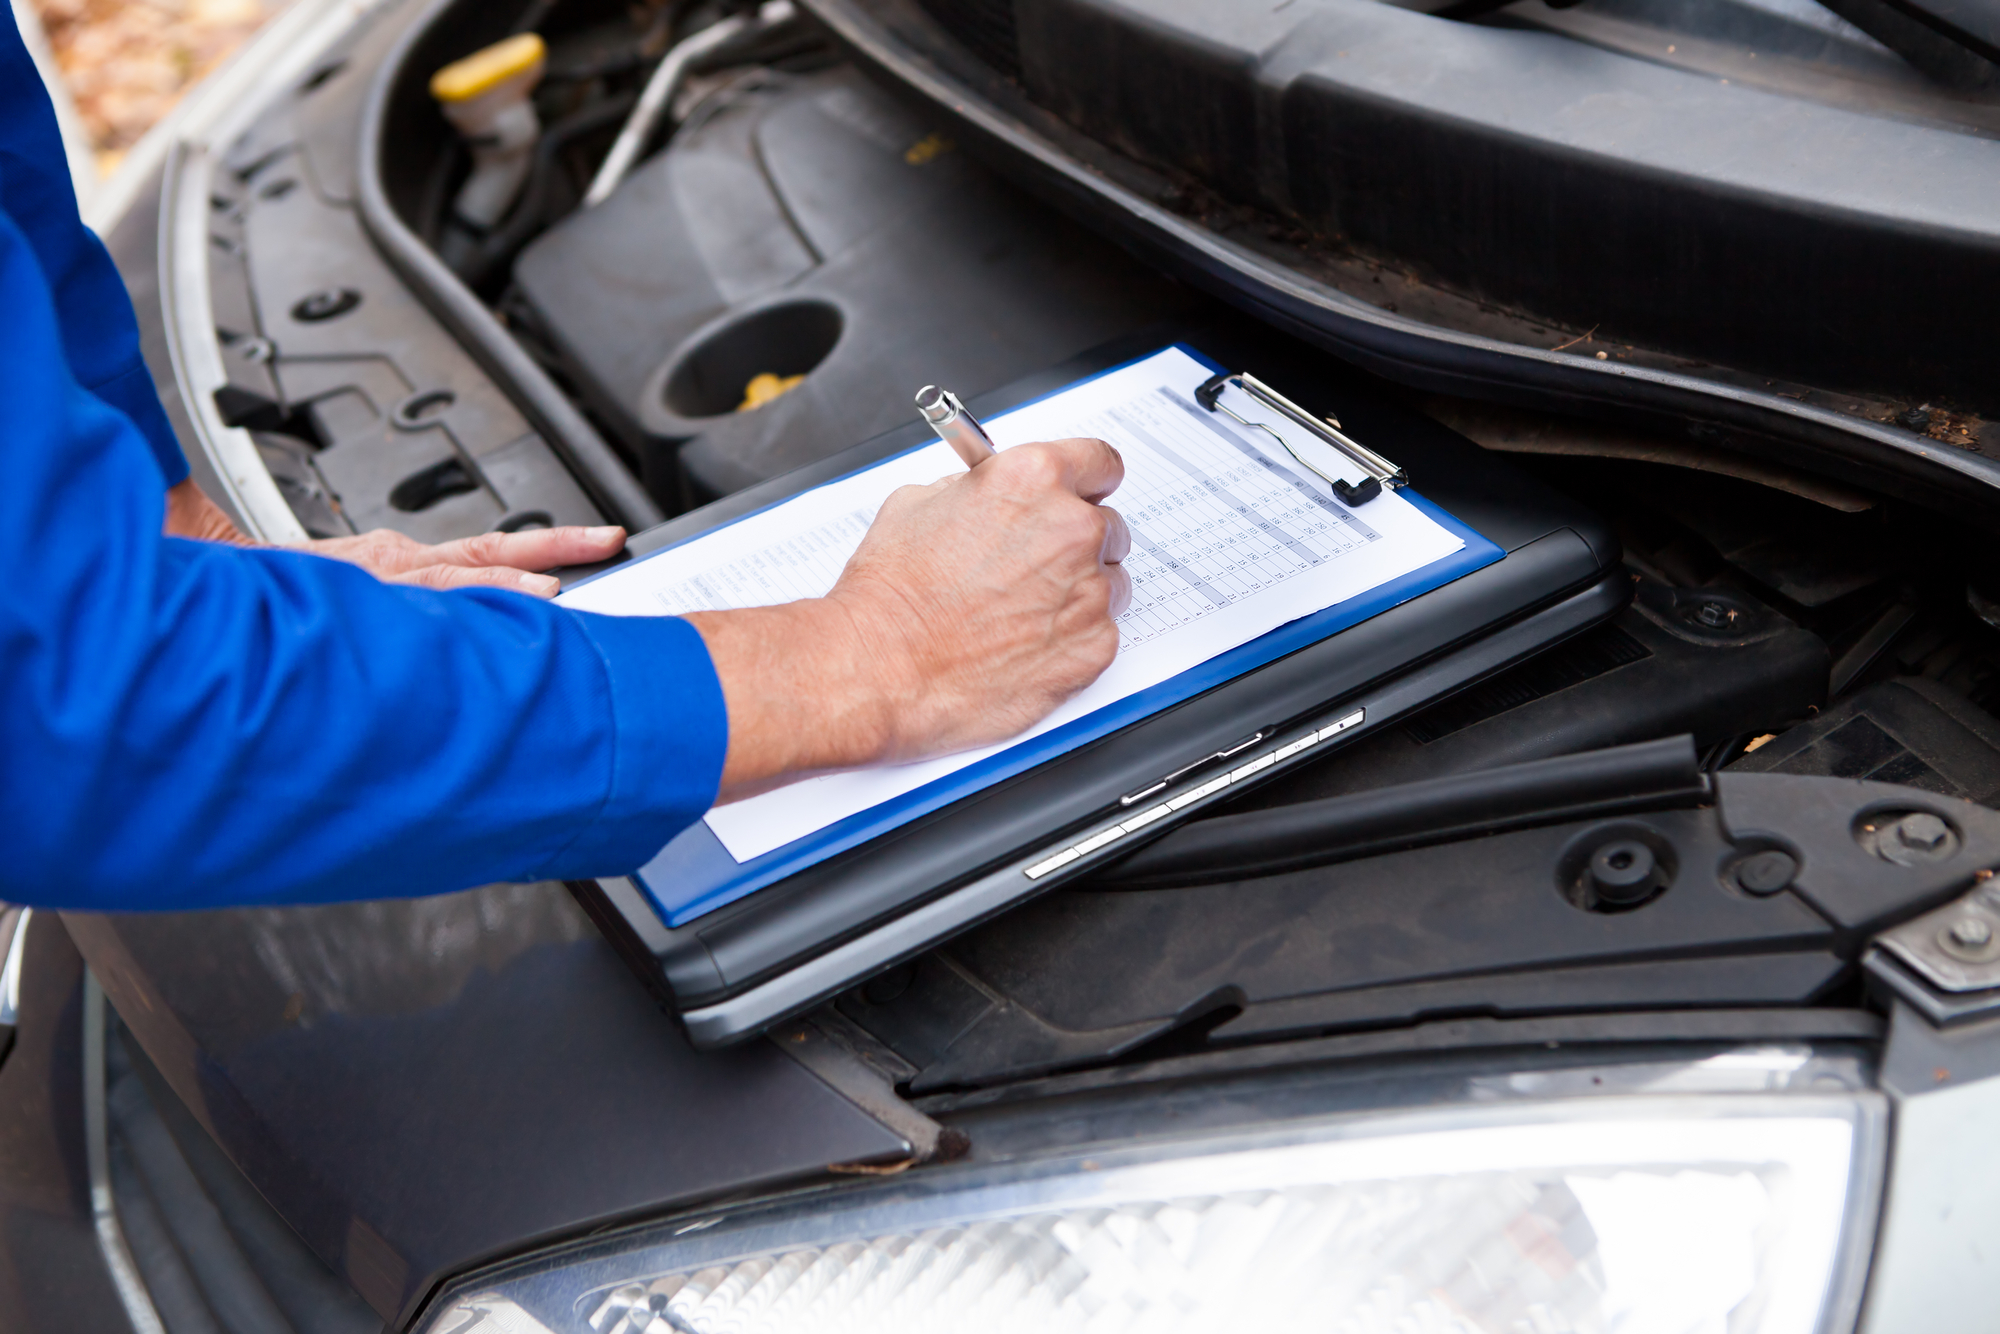 How to Do a Complete Used Car Inspection